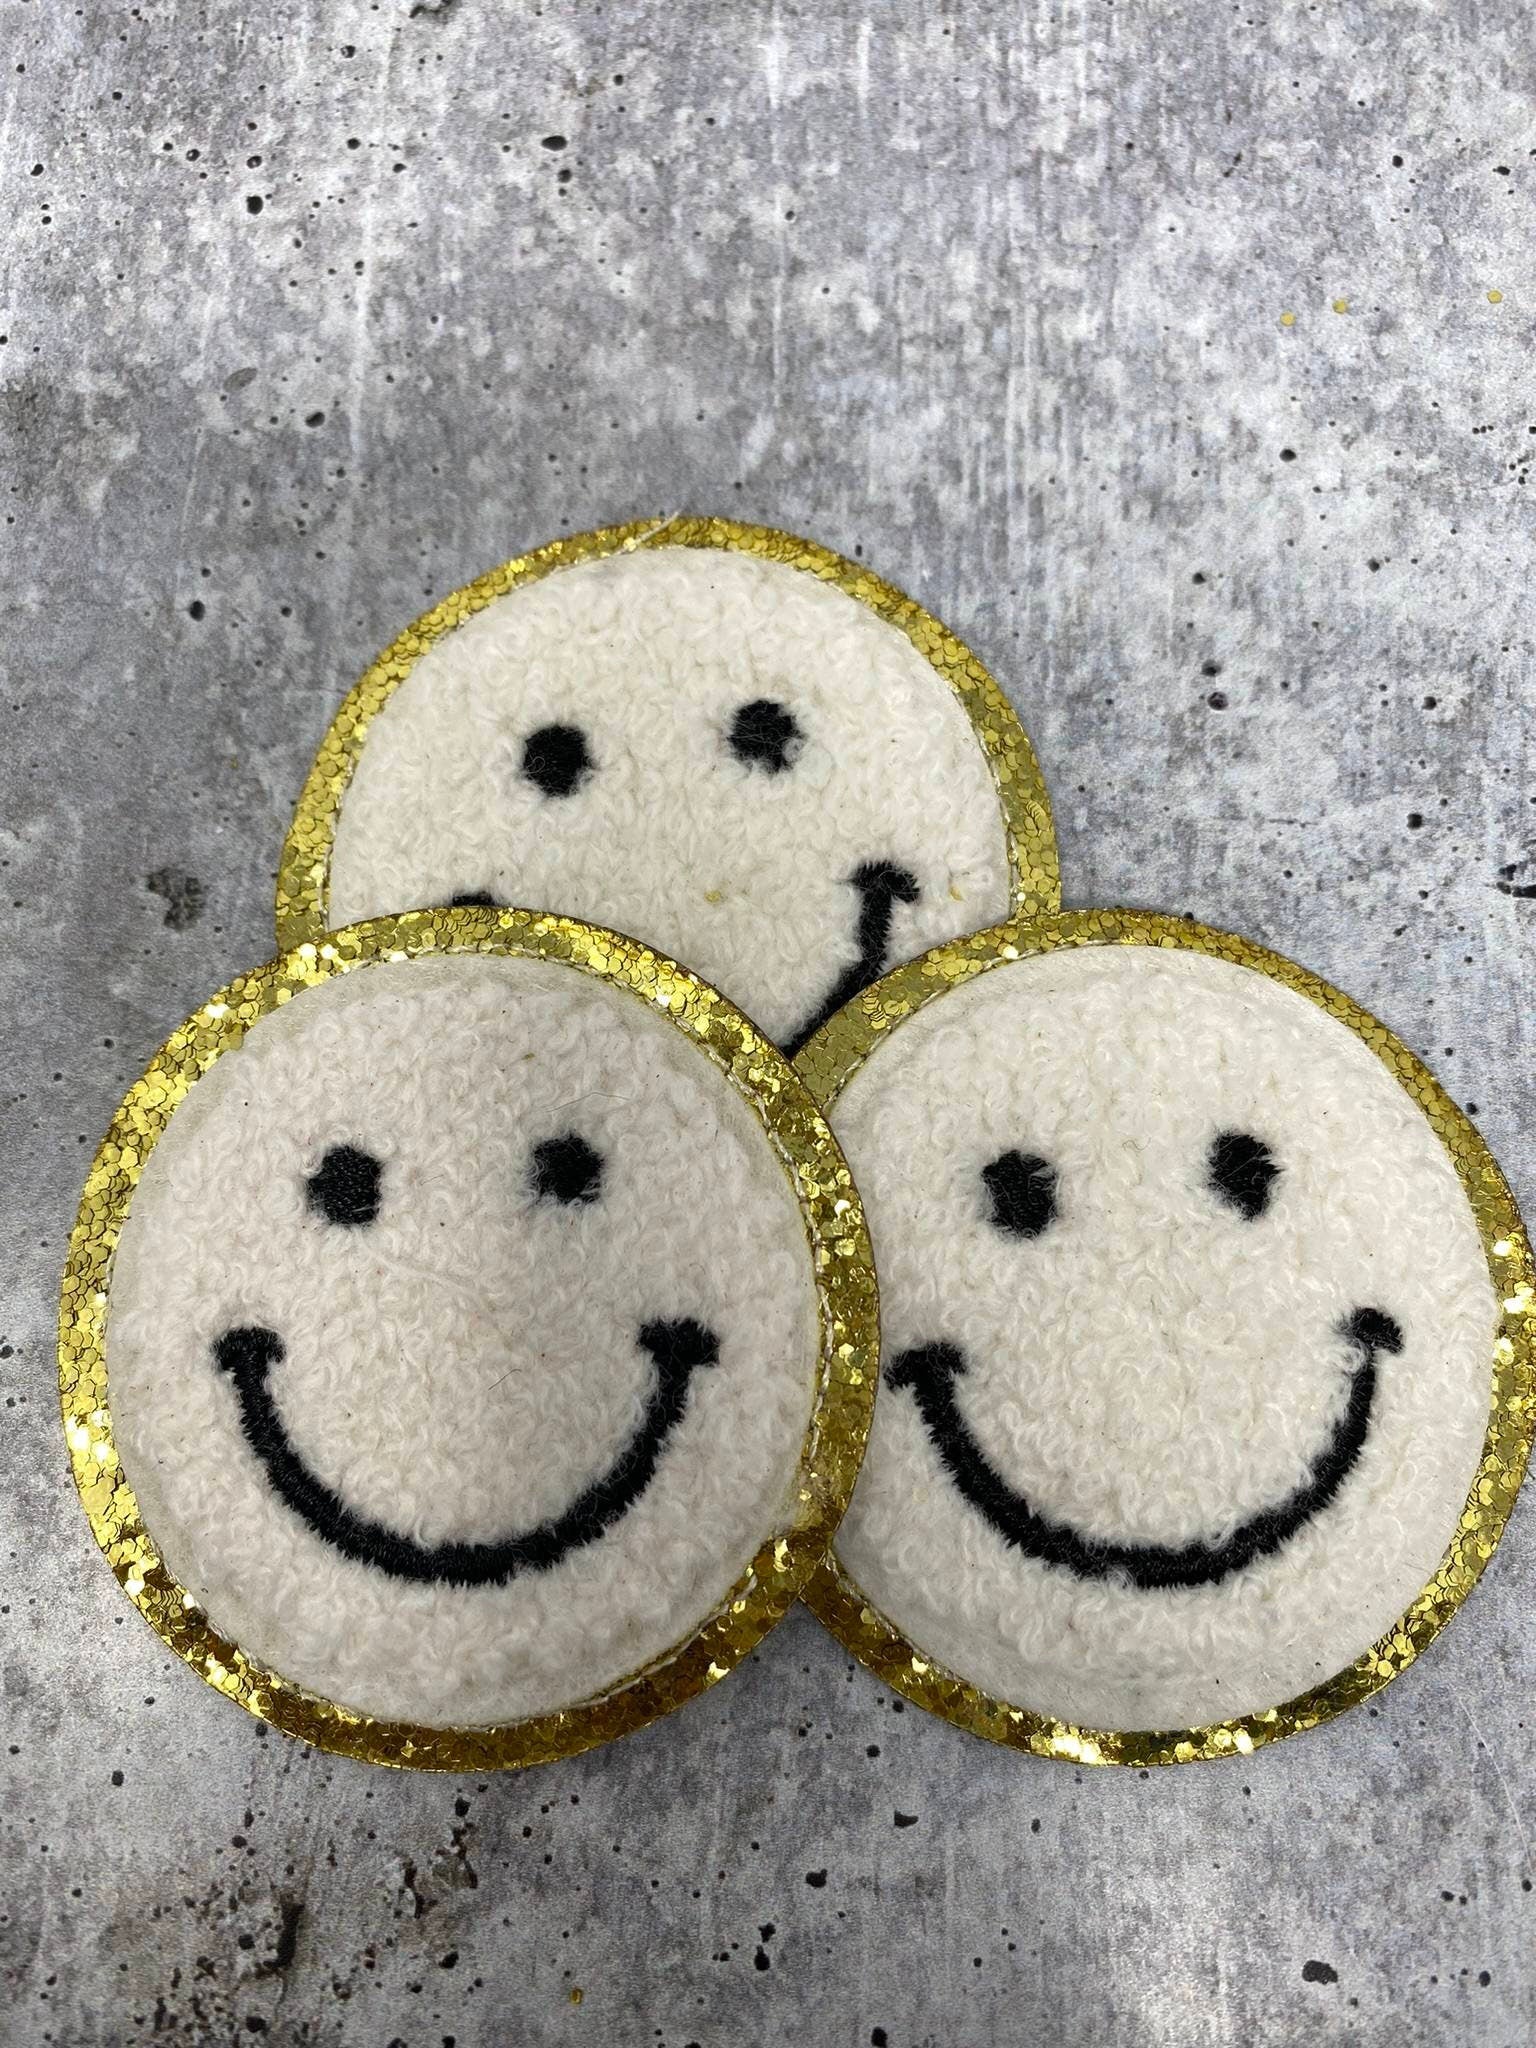 New: White, Chenille "Smile Patch" w/ Gold Glitter, Size 2.5", Smiley Face Patch with Iron-on Backing, Fuzzy Happy Face Applique, Fun Patch